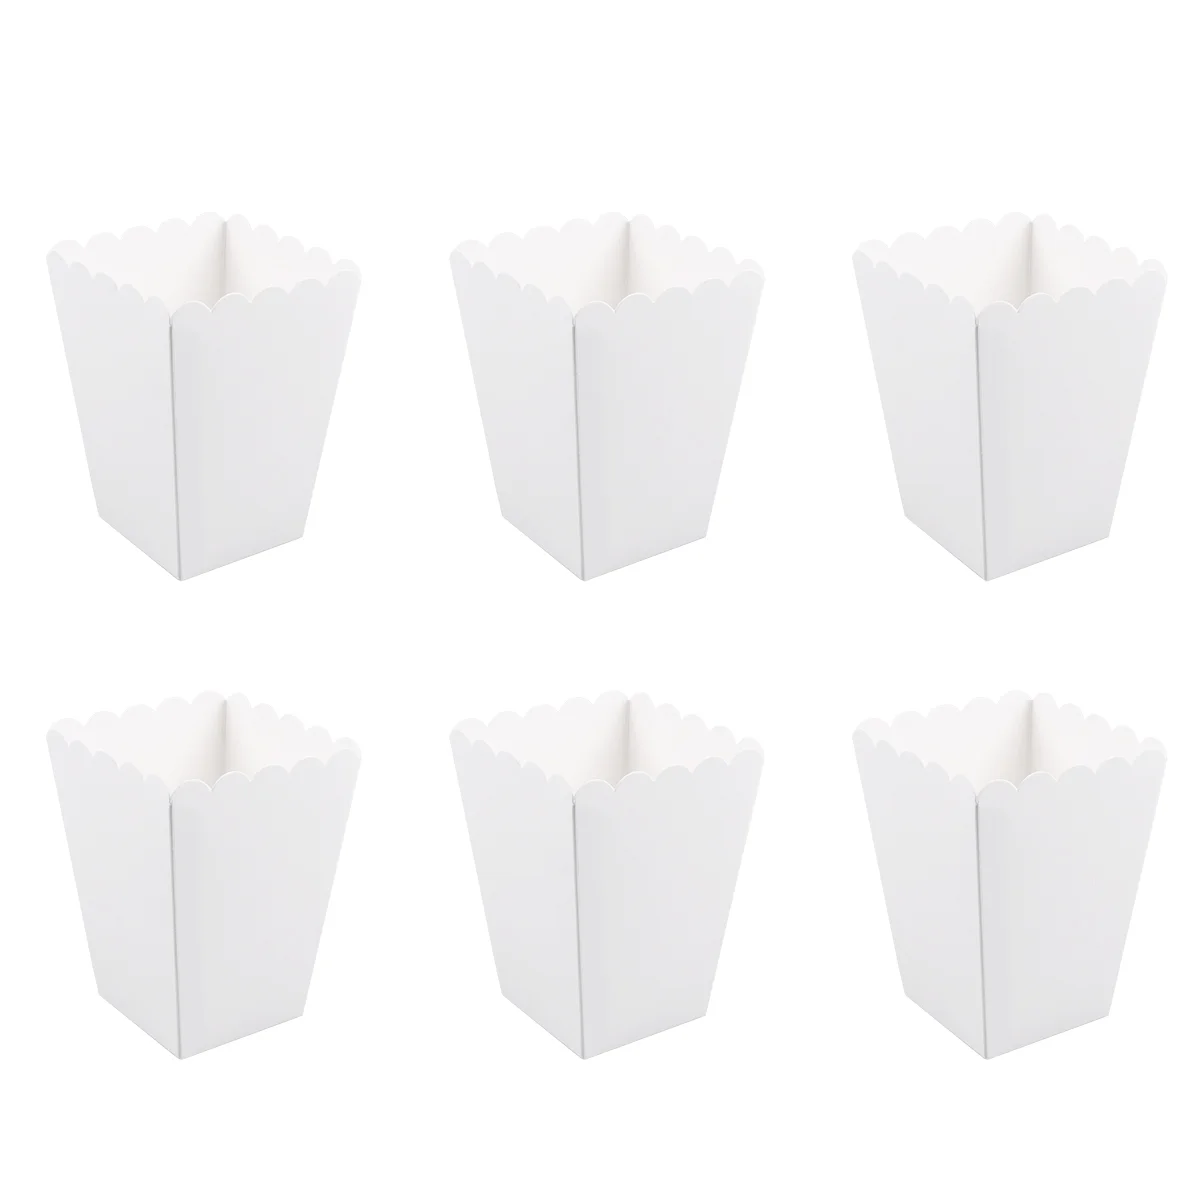 50PCS Snack Cups Paper Packing Box Popcorn Box Paper Food Basket Box for Packing Snack Party Candy Cartons